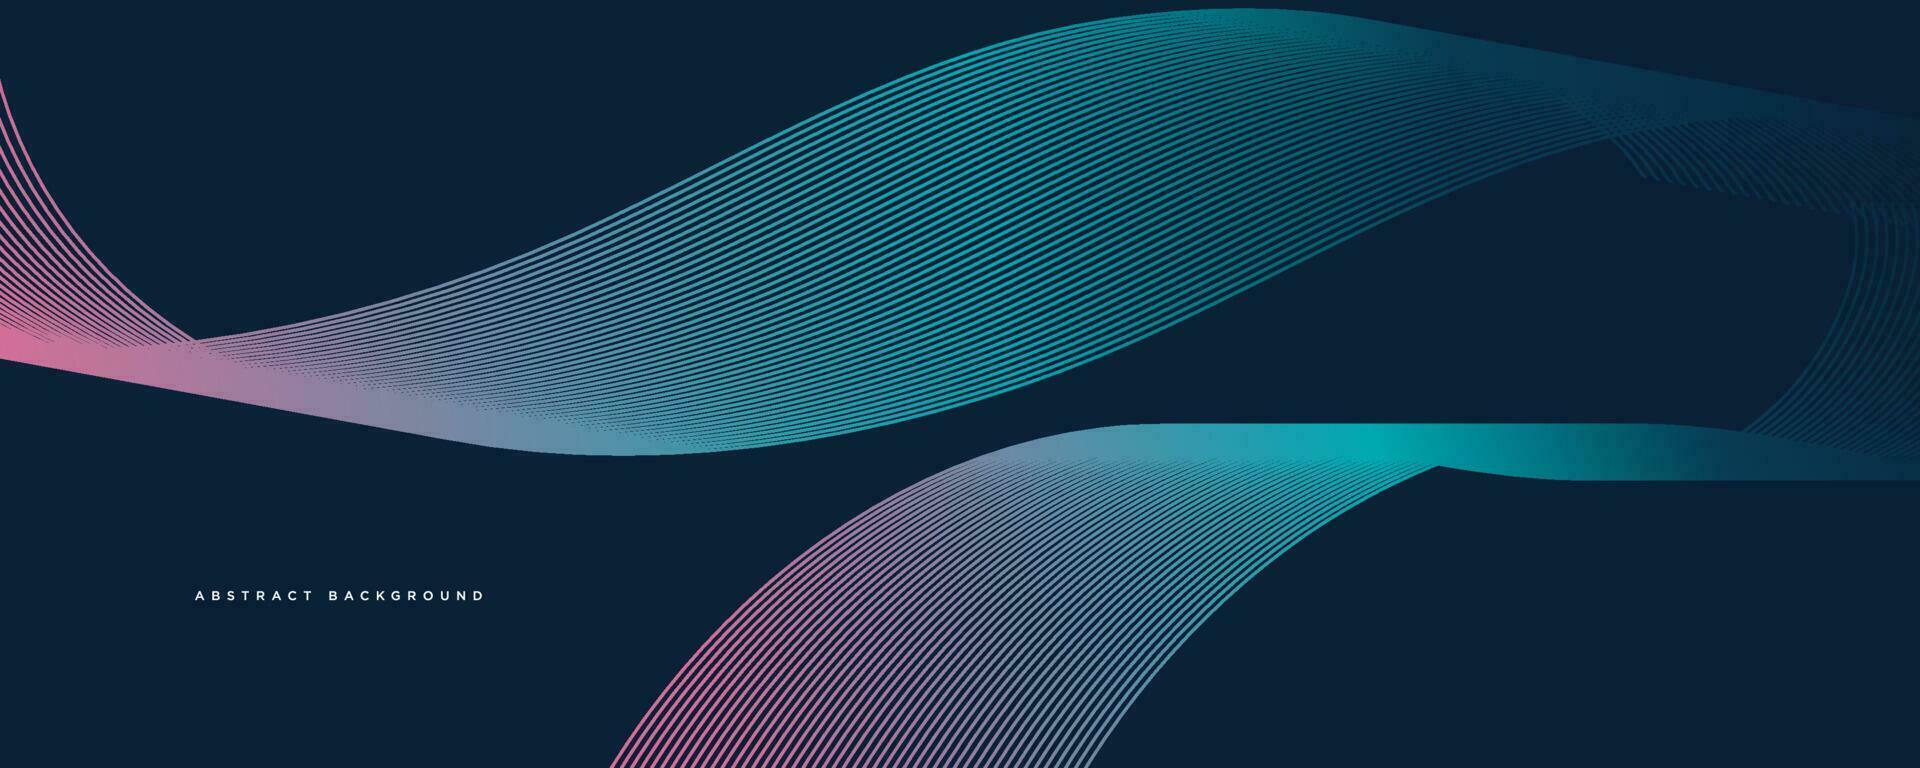 Dark abstract background with glowing waves. Shiny moving line design element. Modern blue purple gradient flowing wave line. Futuristic technology concept. Vector illustration